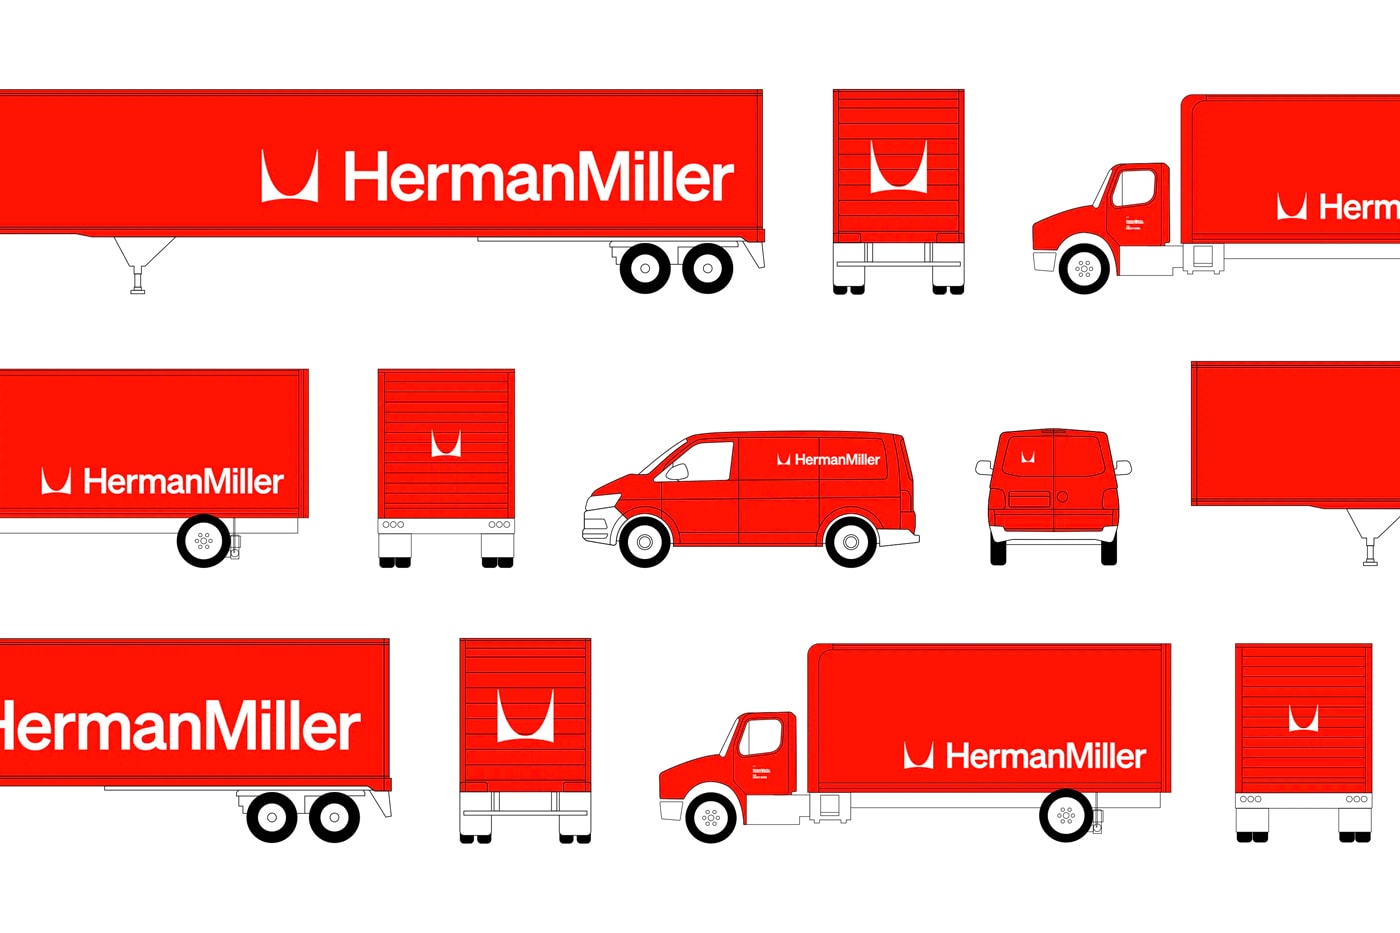 Herman Miller History: The Story of the Herman Miller Company